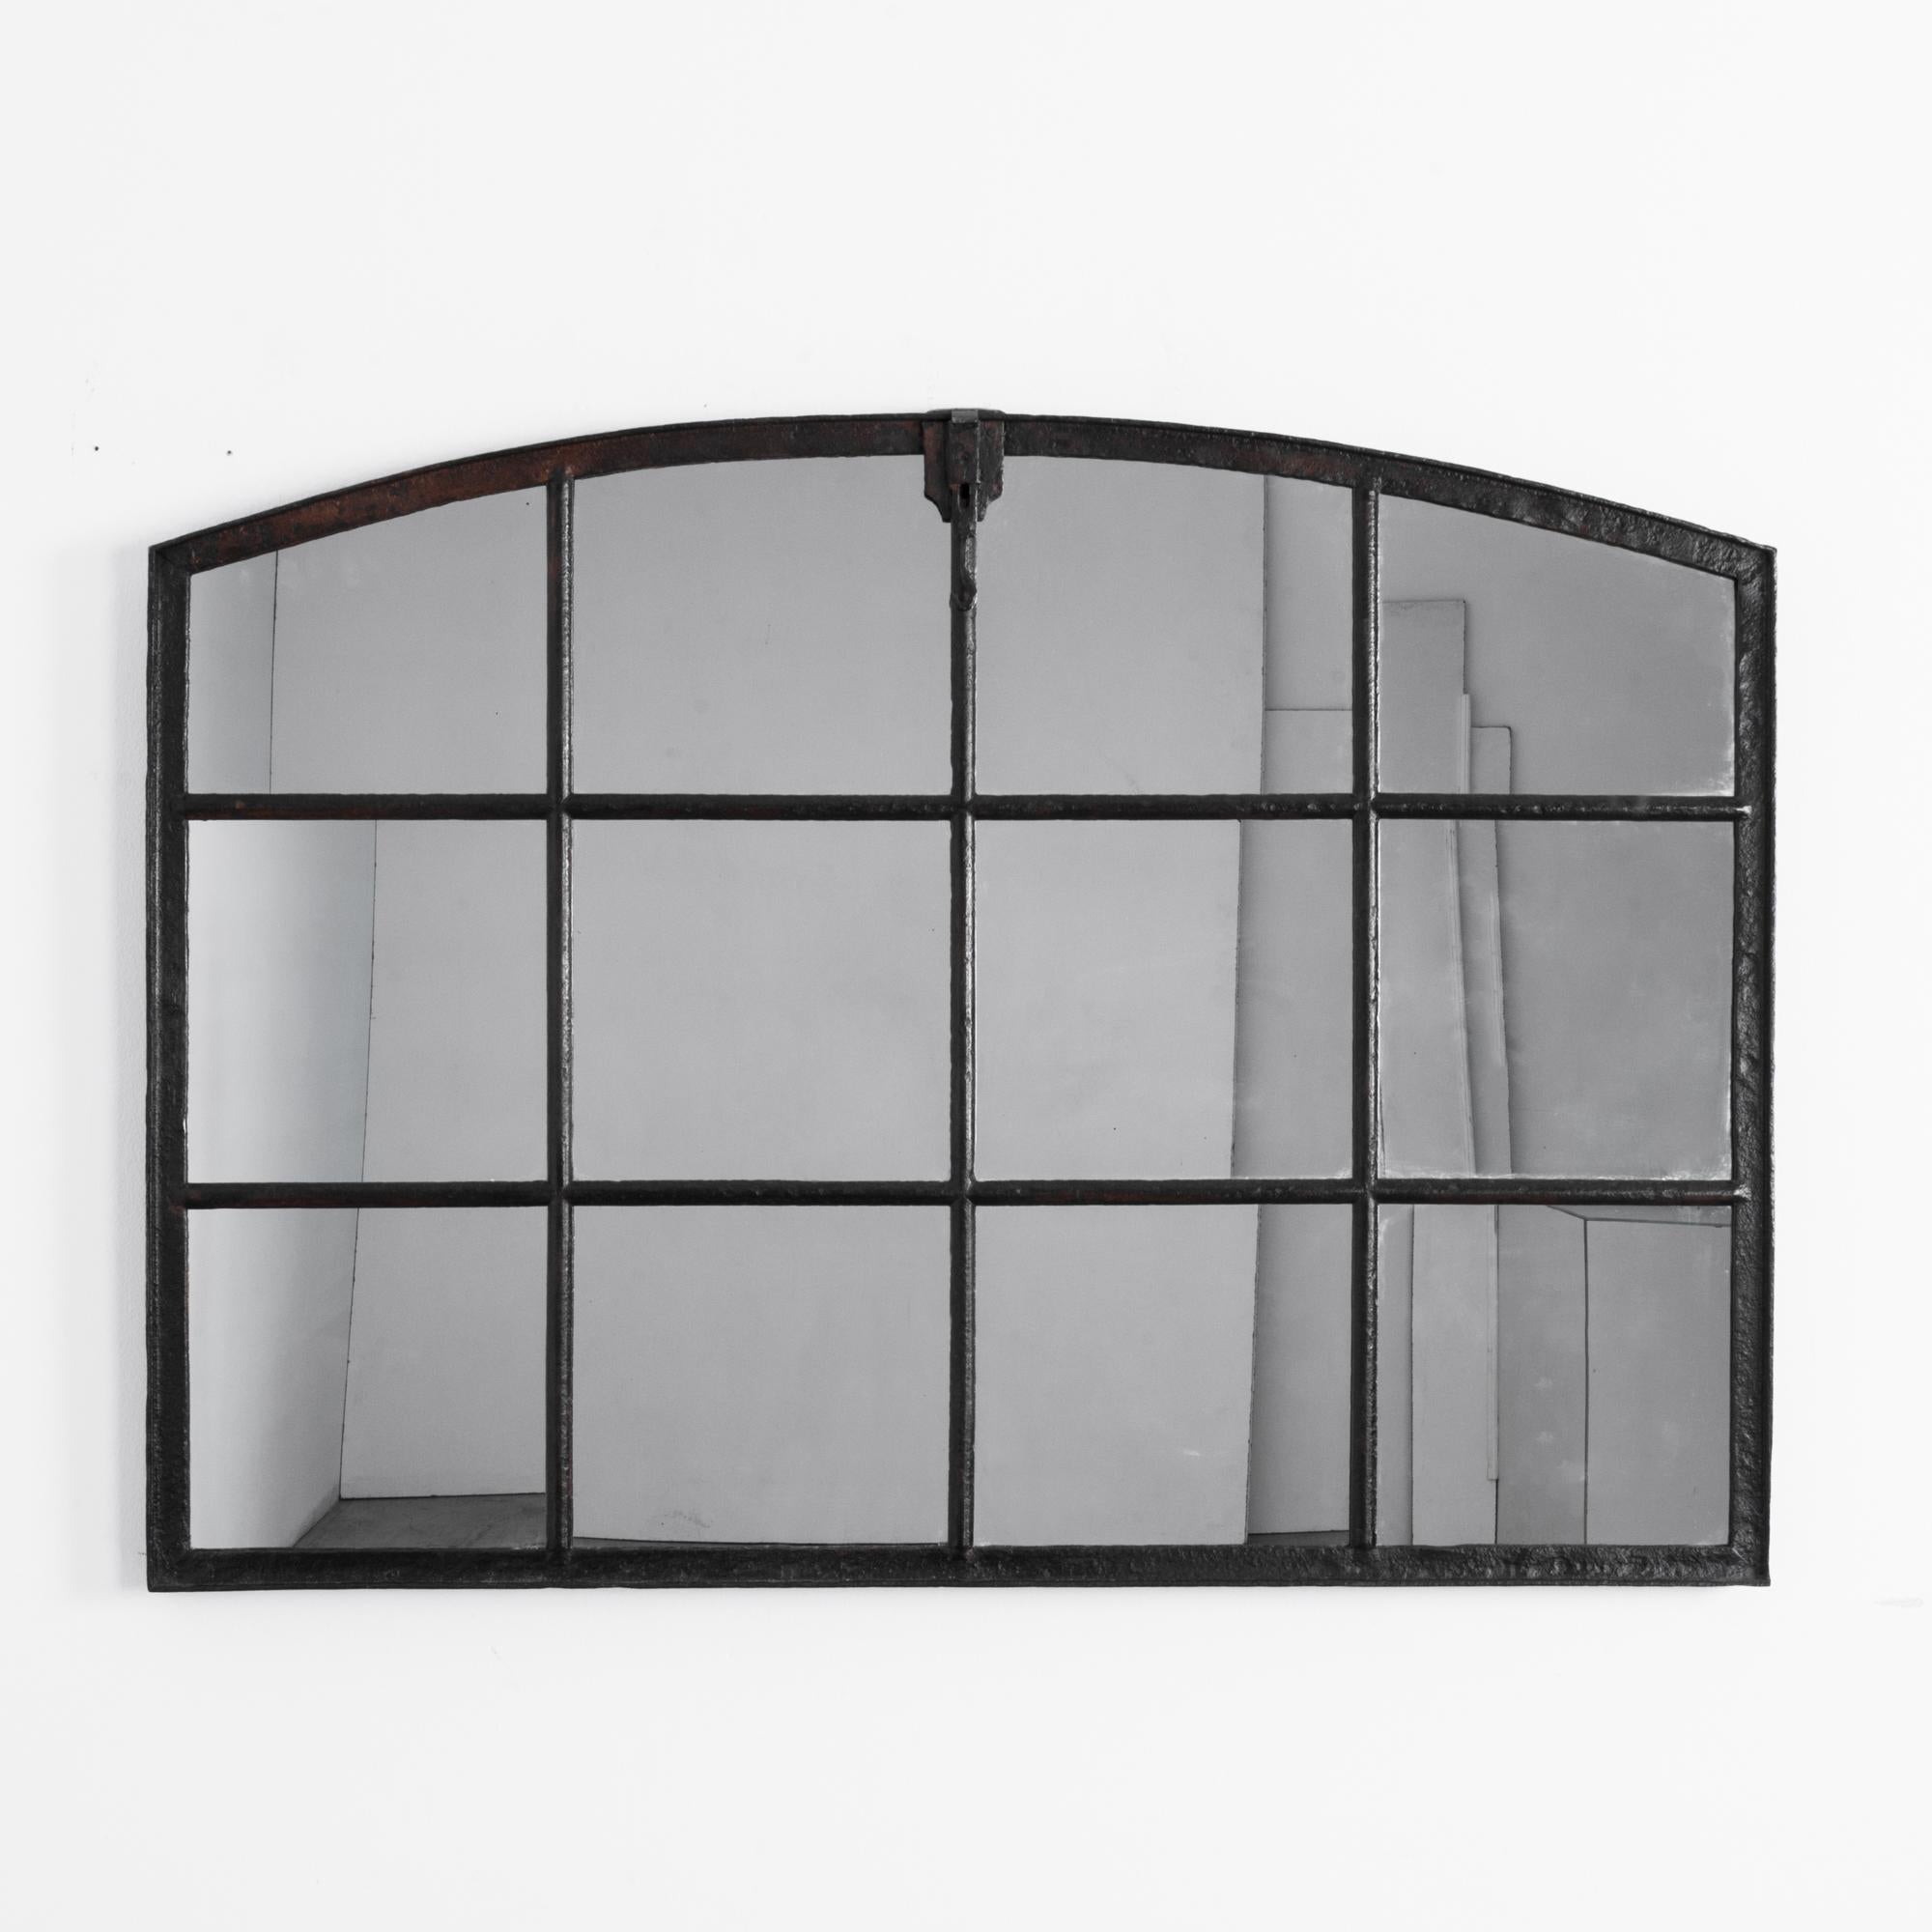 A mirrored factory window from Czechia, circa 1920. A wide mirror is sustained by a grid of cast metal. The dark color and sheer weight of the frame give this mirror an impressive presence, softened by a gentle arch. A striking post-industrial piece